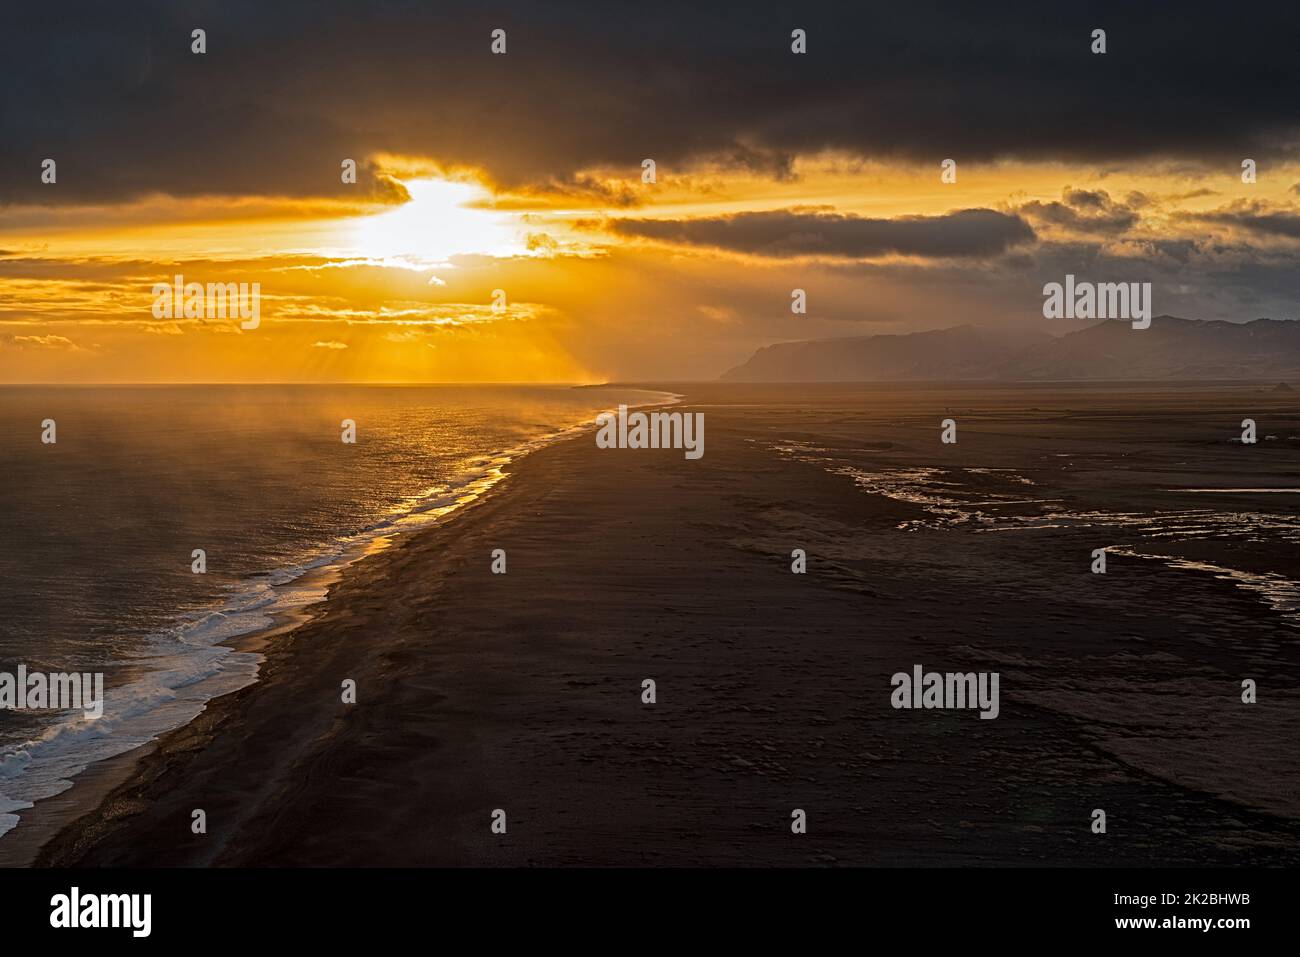 View of the black sand beach from Dyrholaey at sunset, Iceland Stock Photo